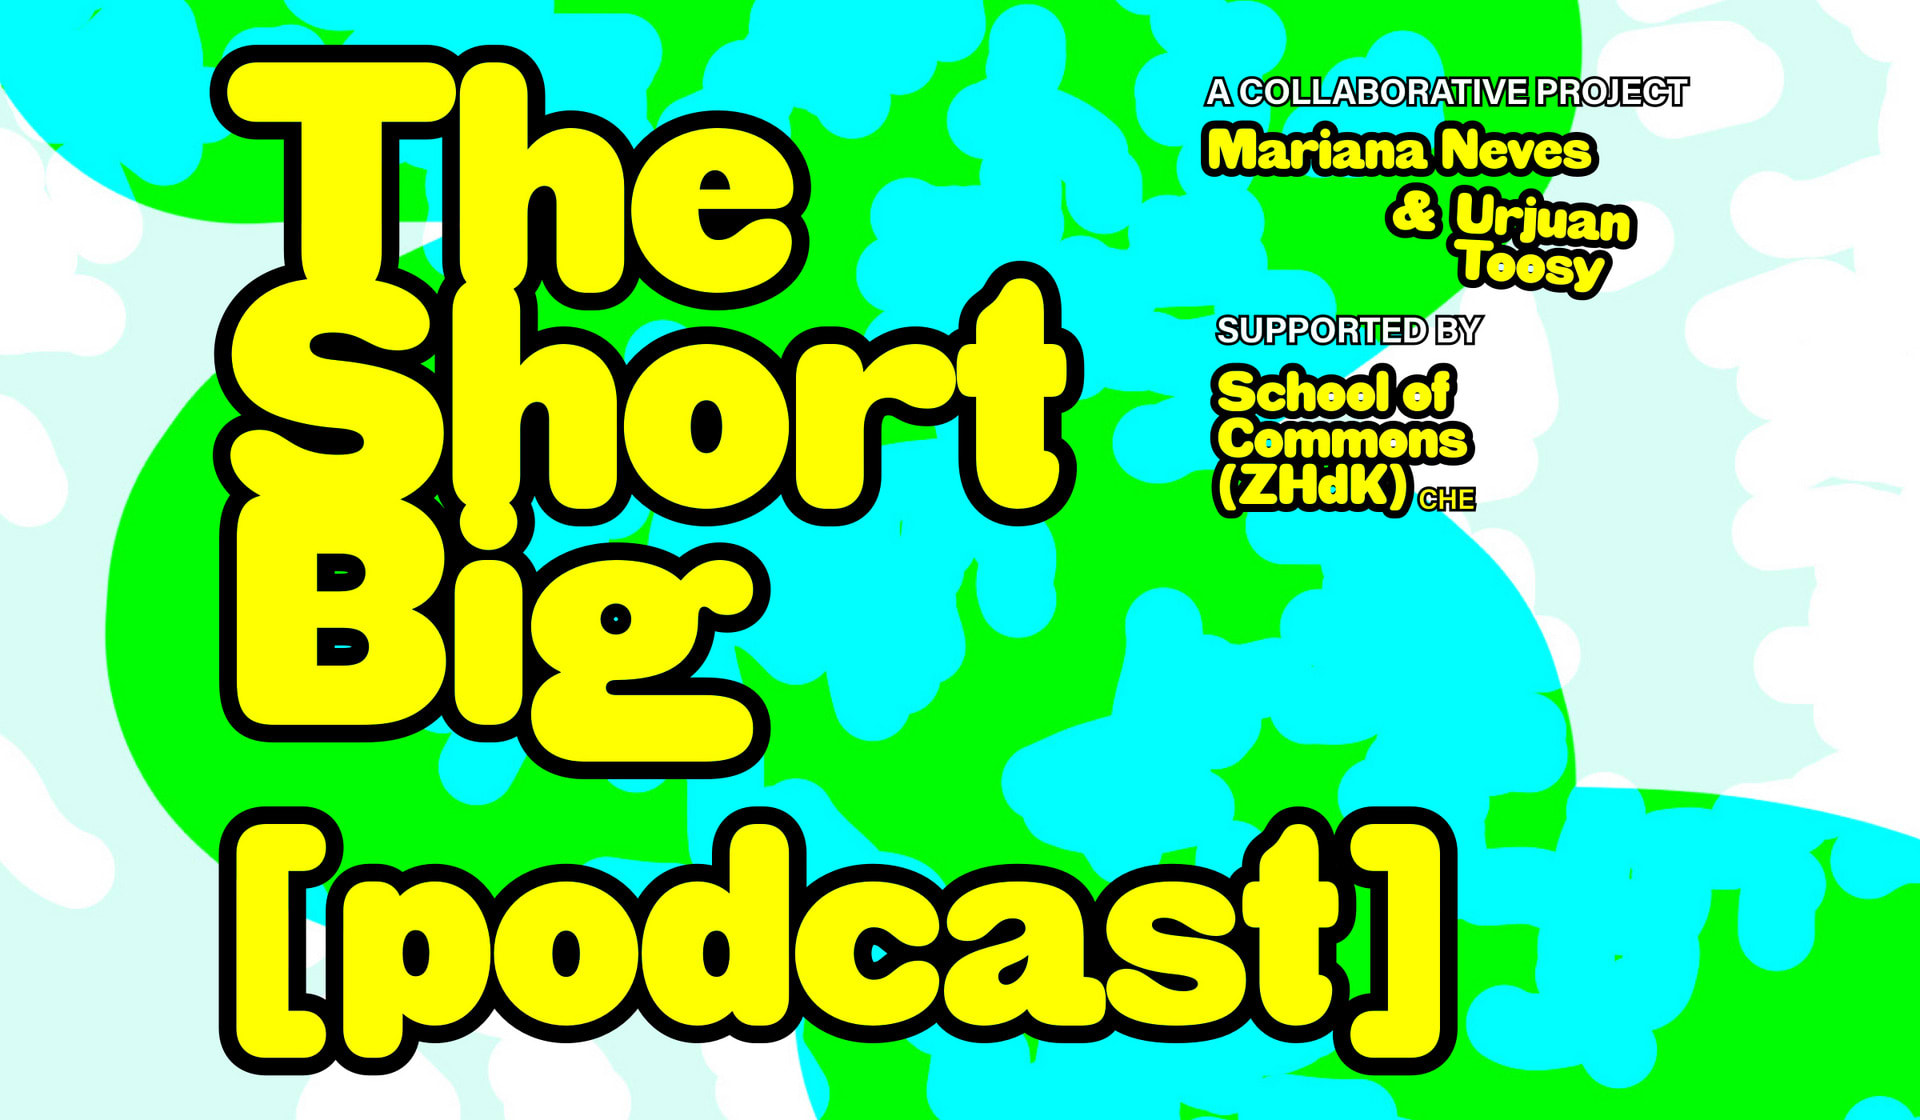 The Short Big [podcast] is a collaborative project by Mariana Neves and Urjuan Toosy. Sponsored by The School of Commons (ZHdK).